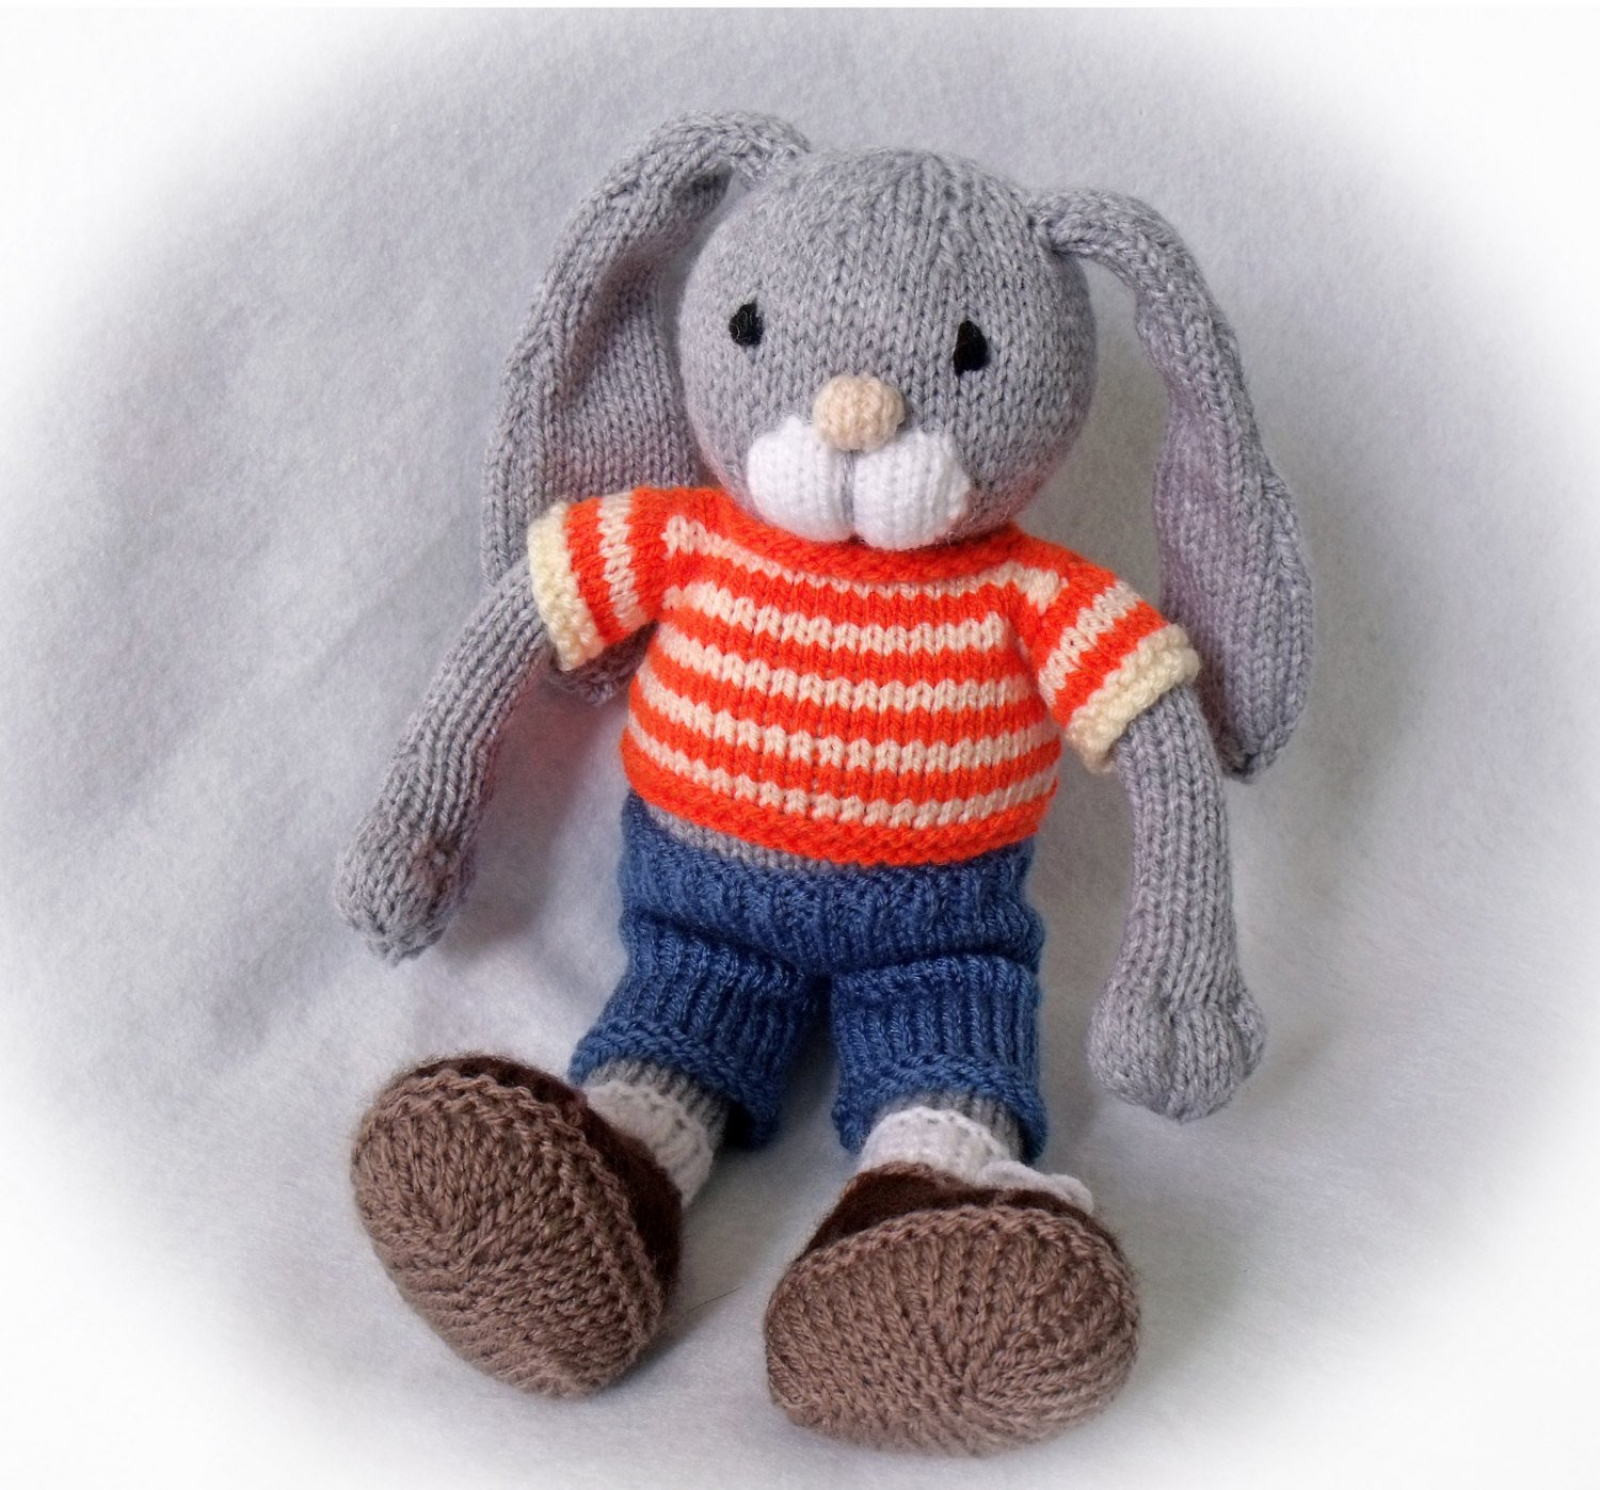 Toy knitting pattern. Ernie the Bunny. Floppy eared bunny with paws